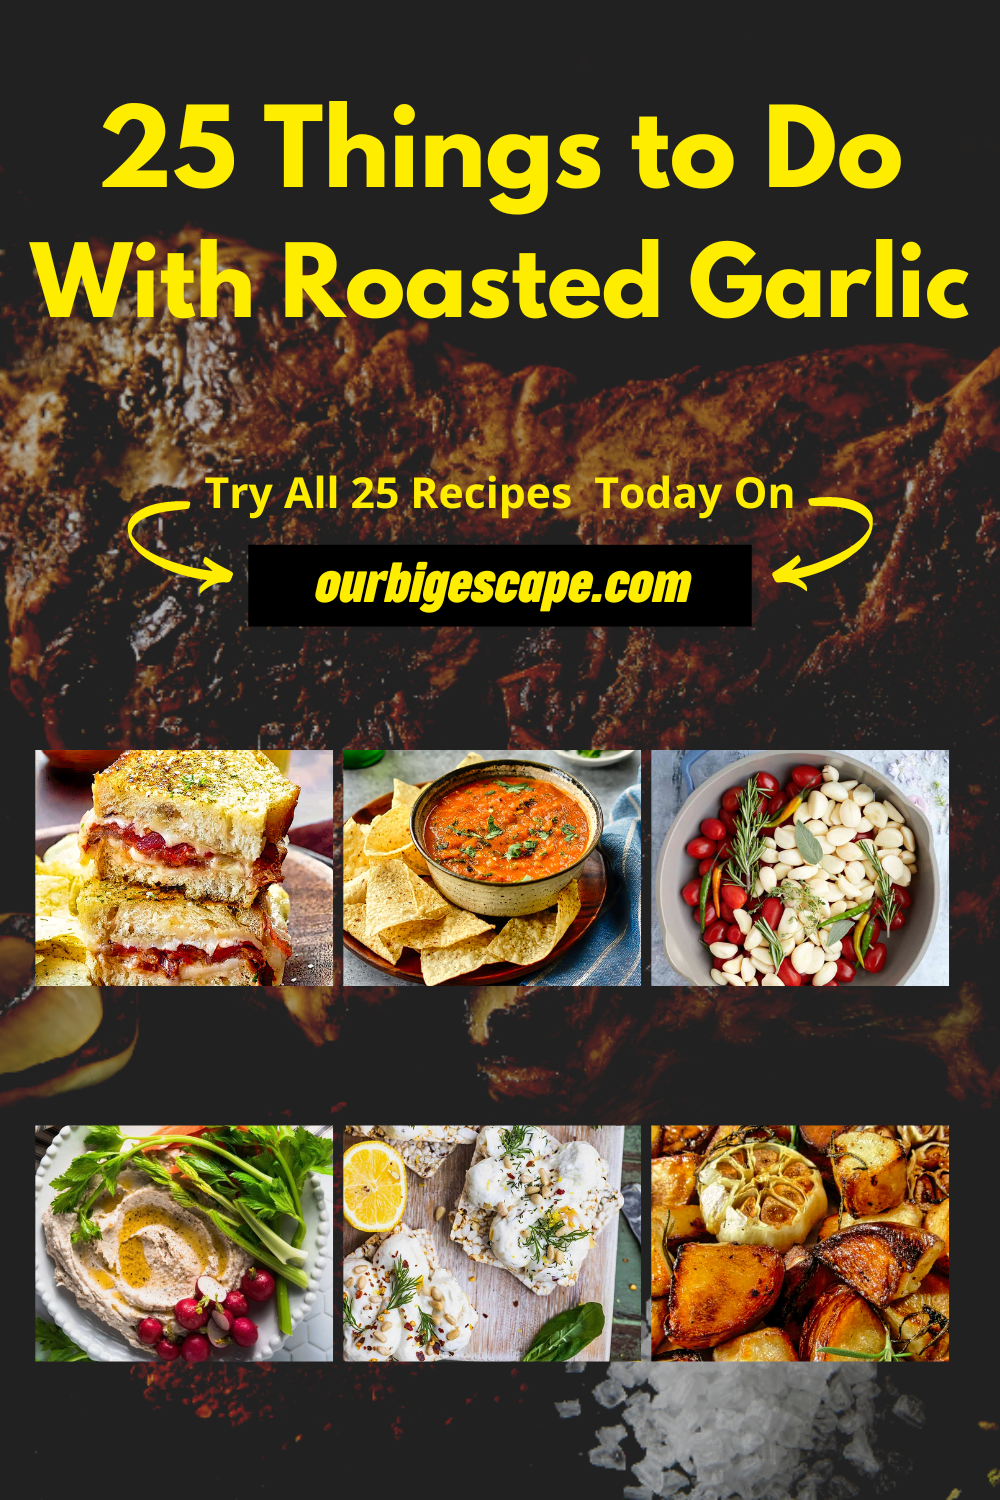 Things to do with roasted garlic